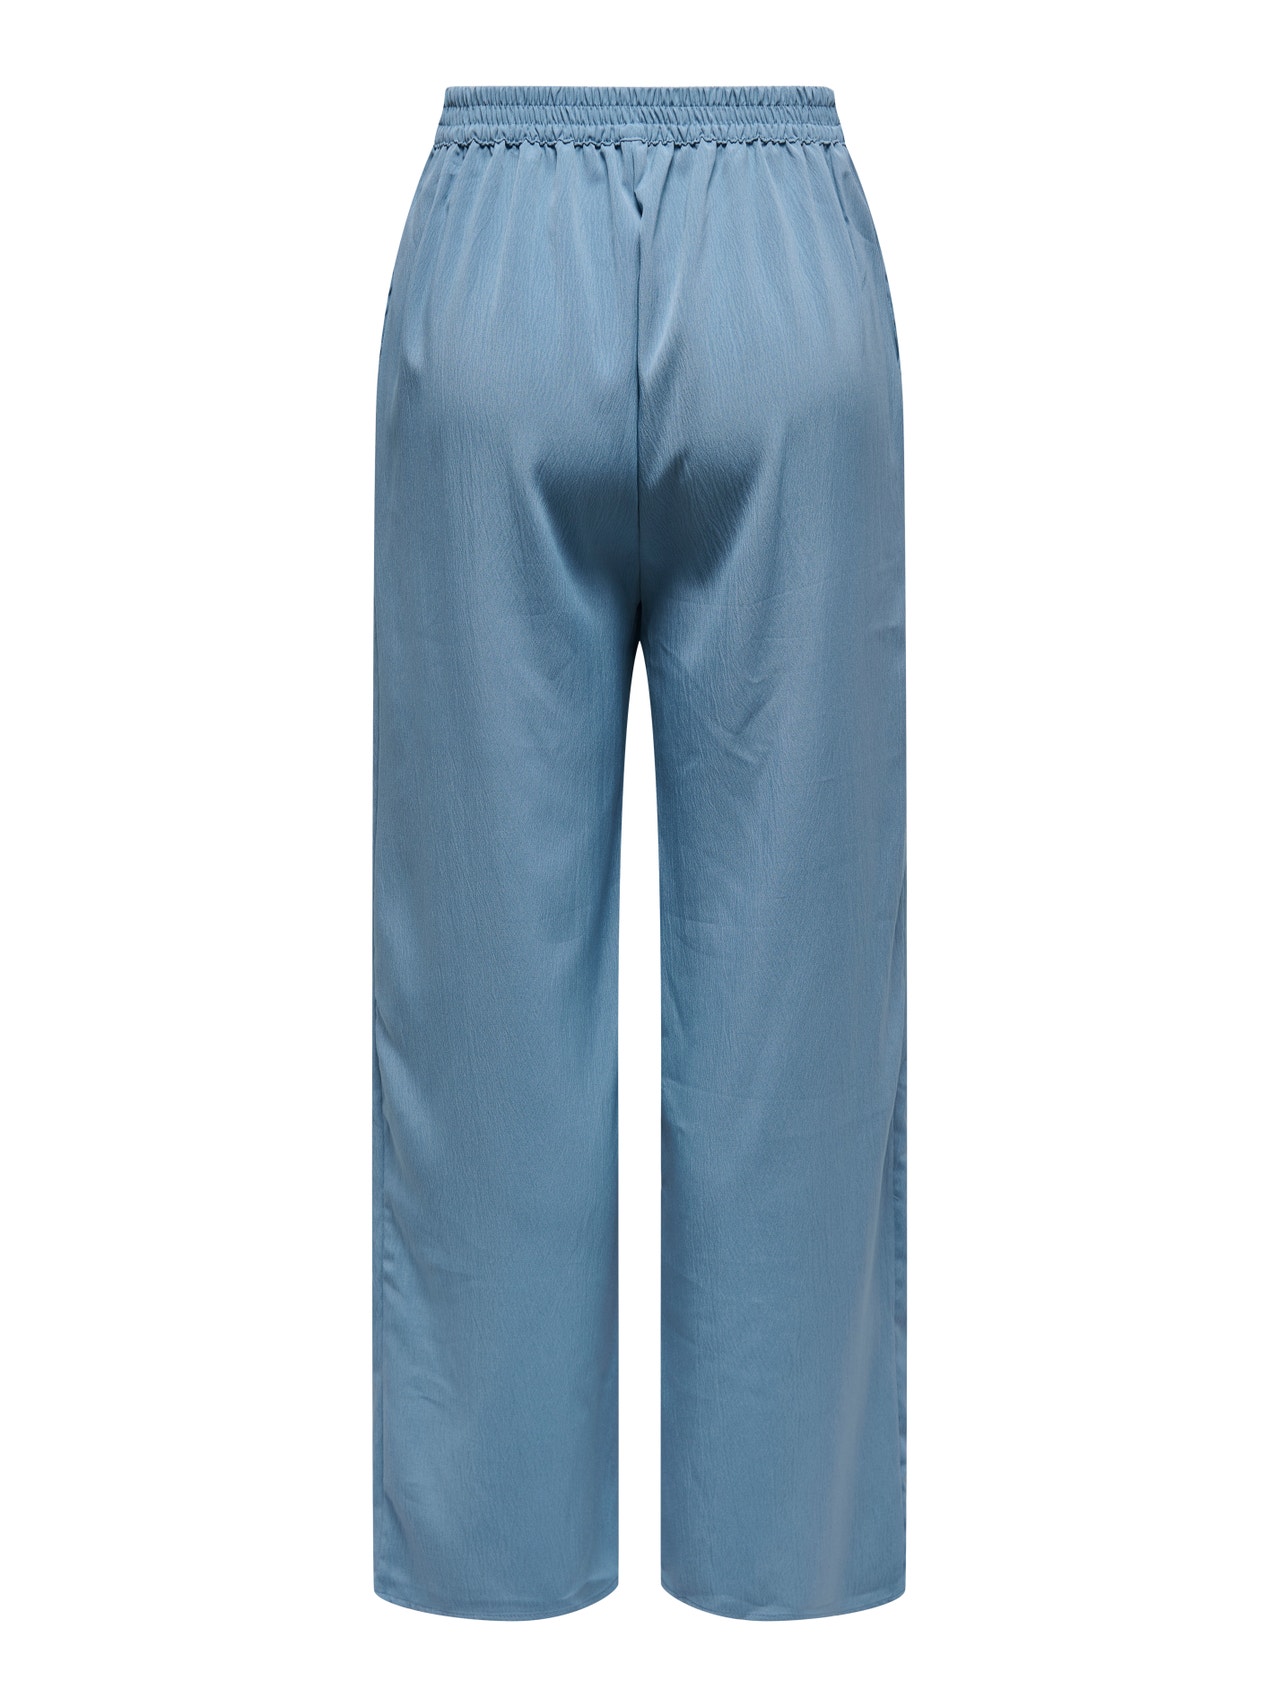 ONLY Trousers with tie belt -Coronet Blue - 15335560